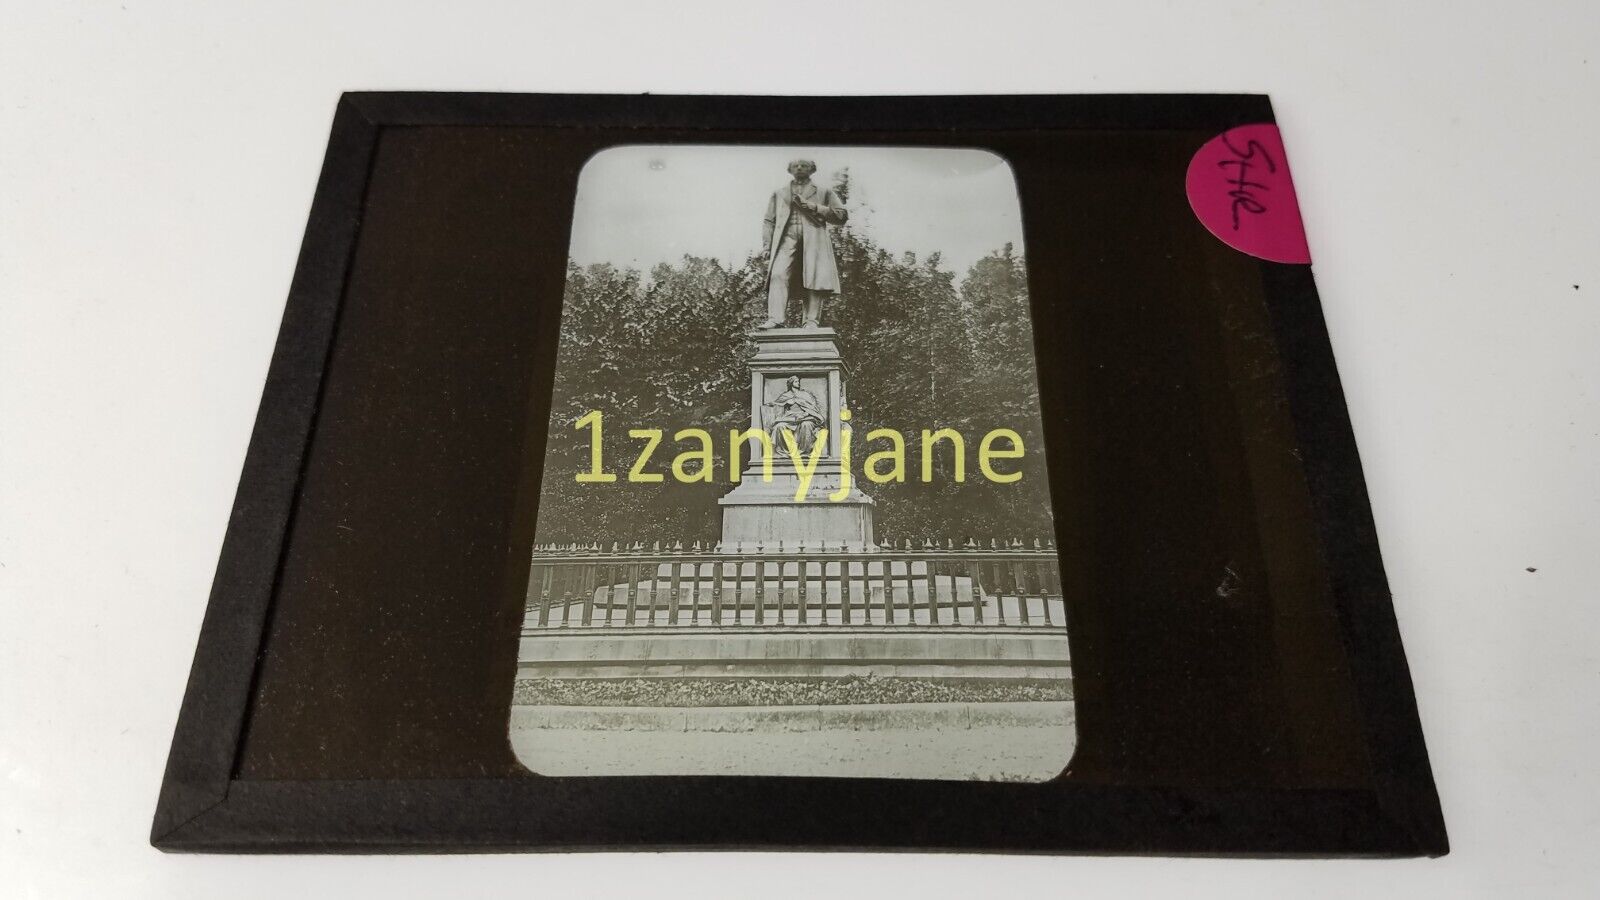 SHR Glass Magic Lantern Slide Photo STATUE IN PARK SURROUNDED BY WROUGHT FENCE